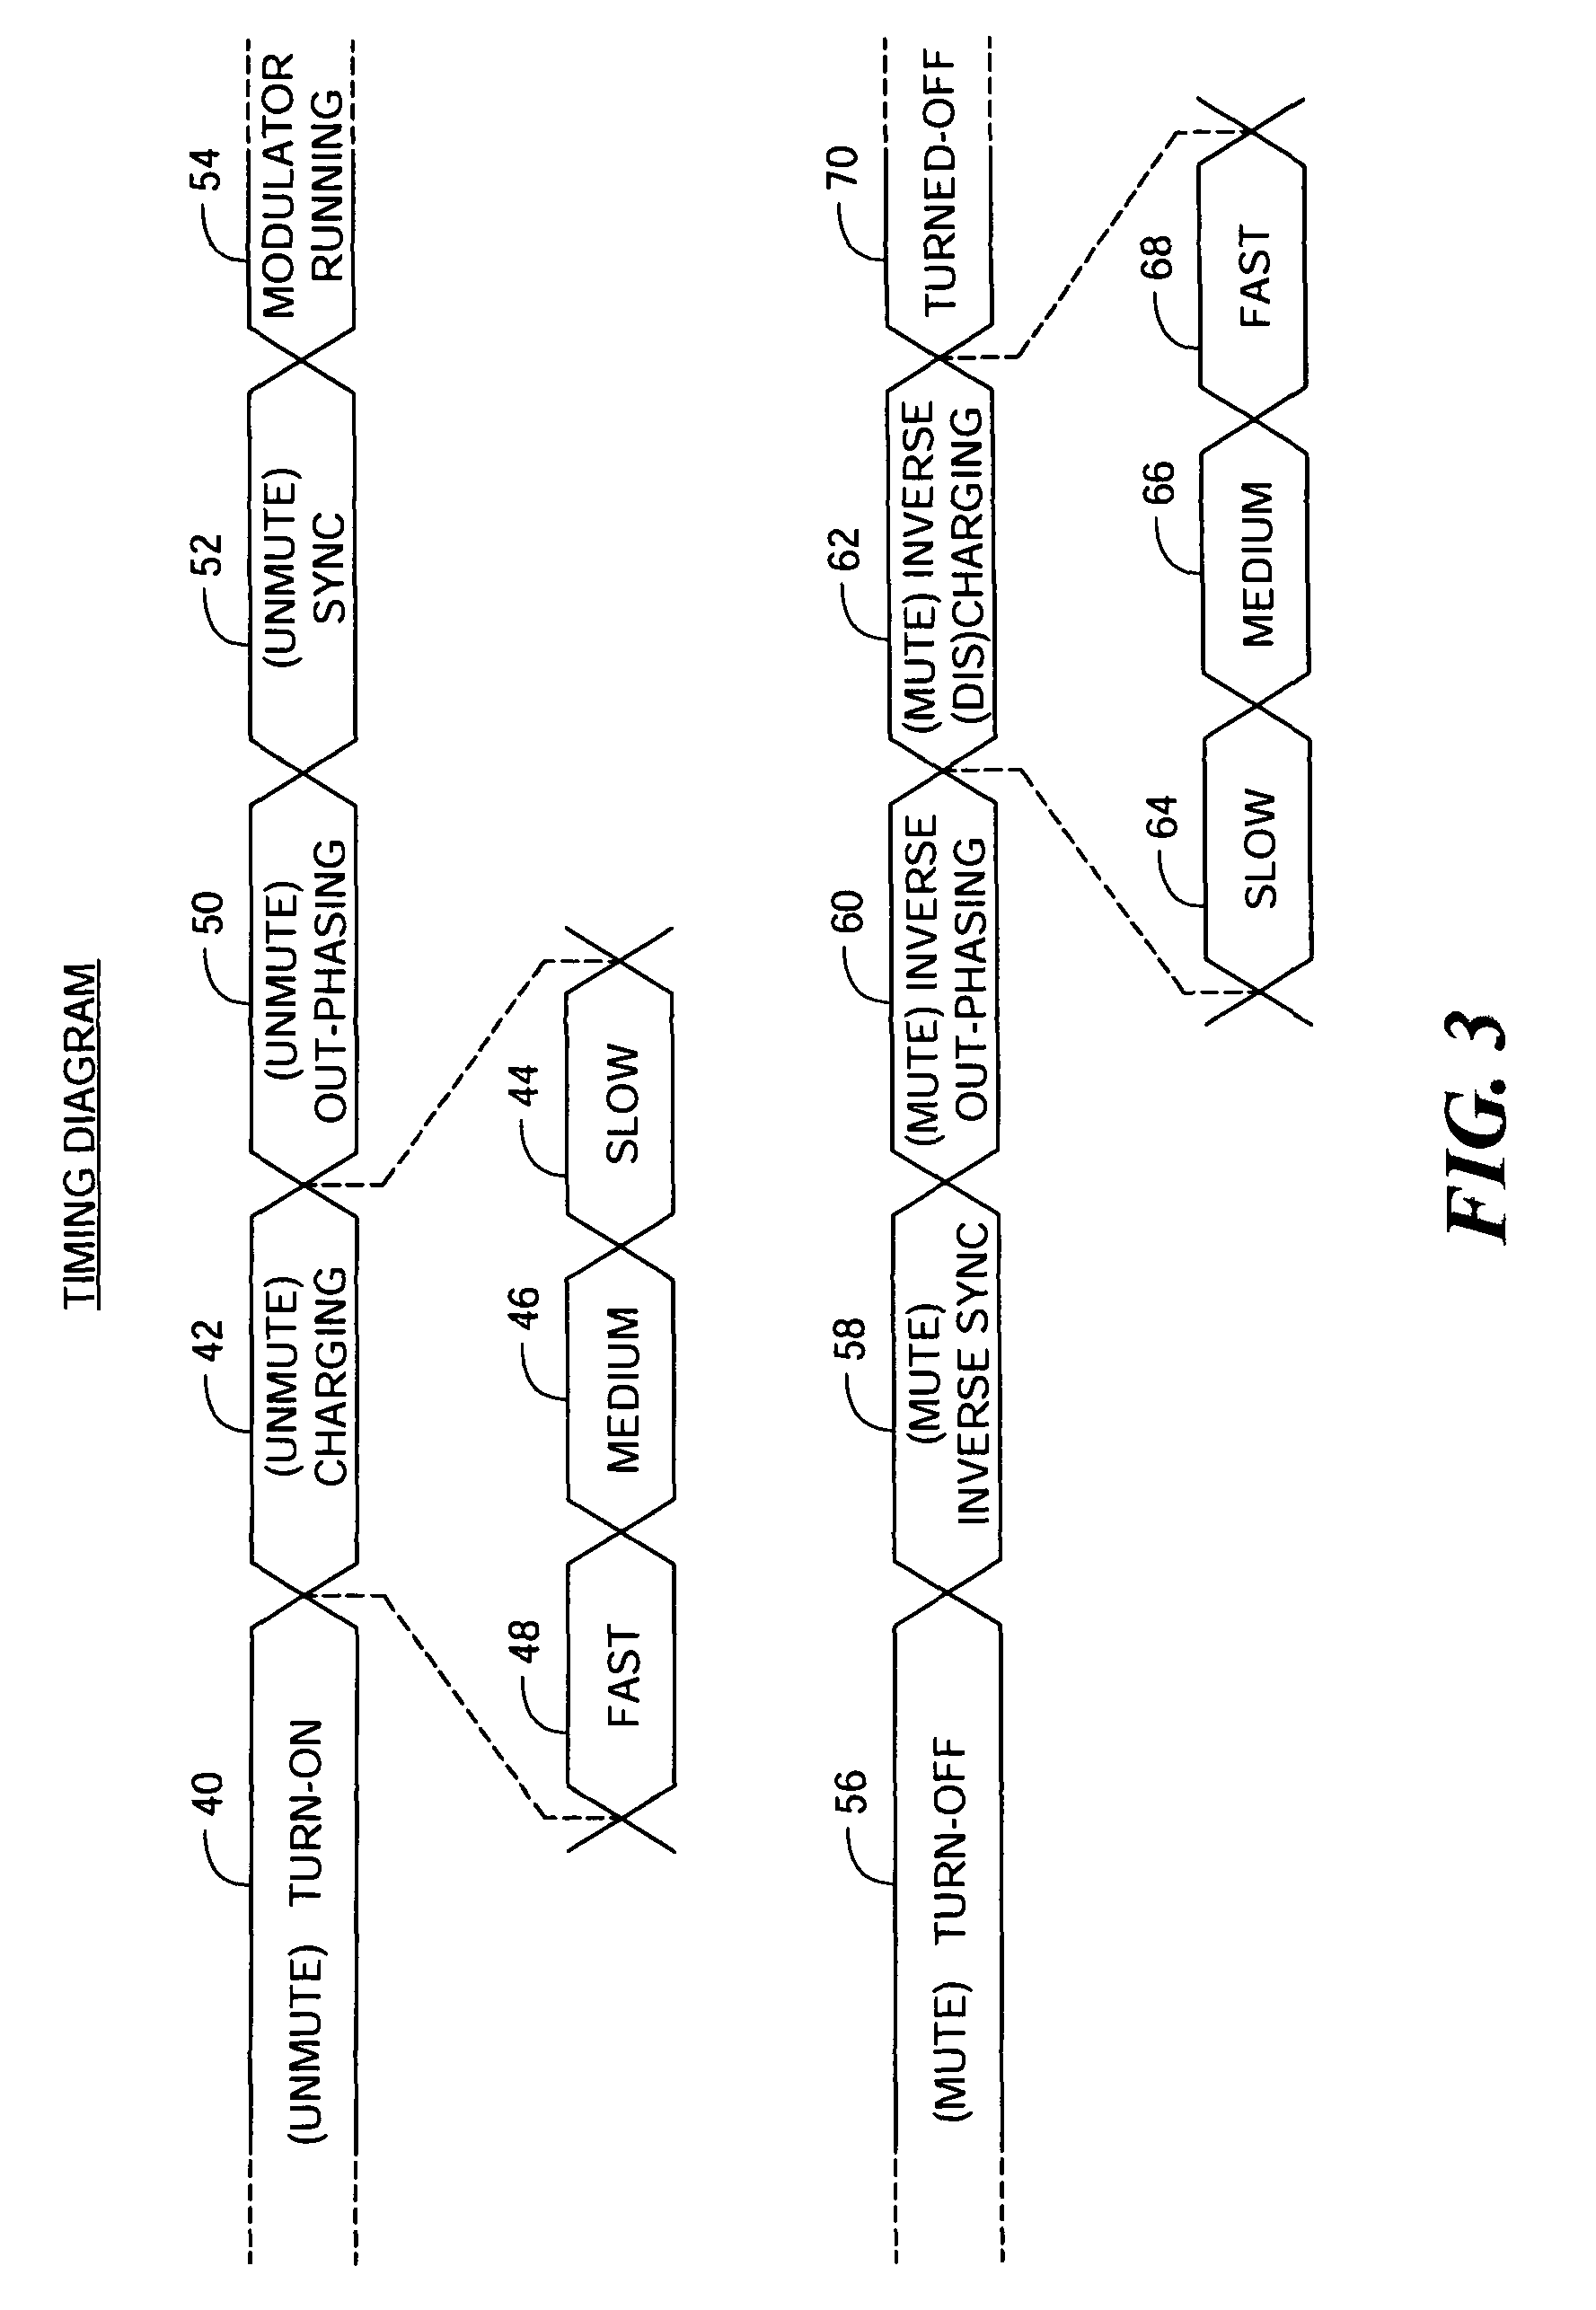 Noise reduction system and method for audio switching amplifier